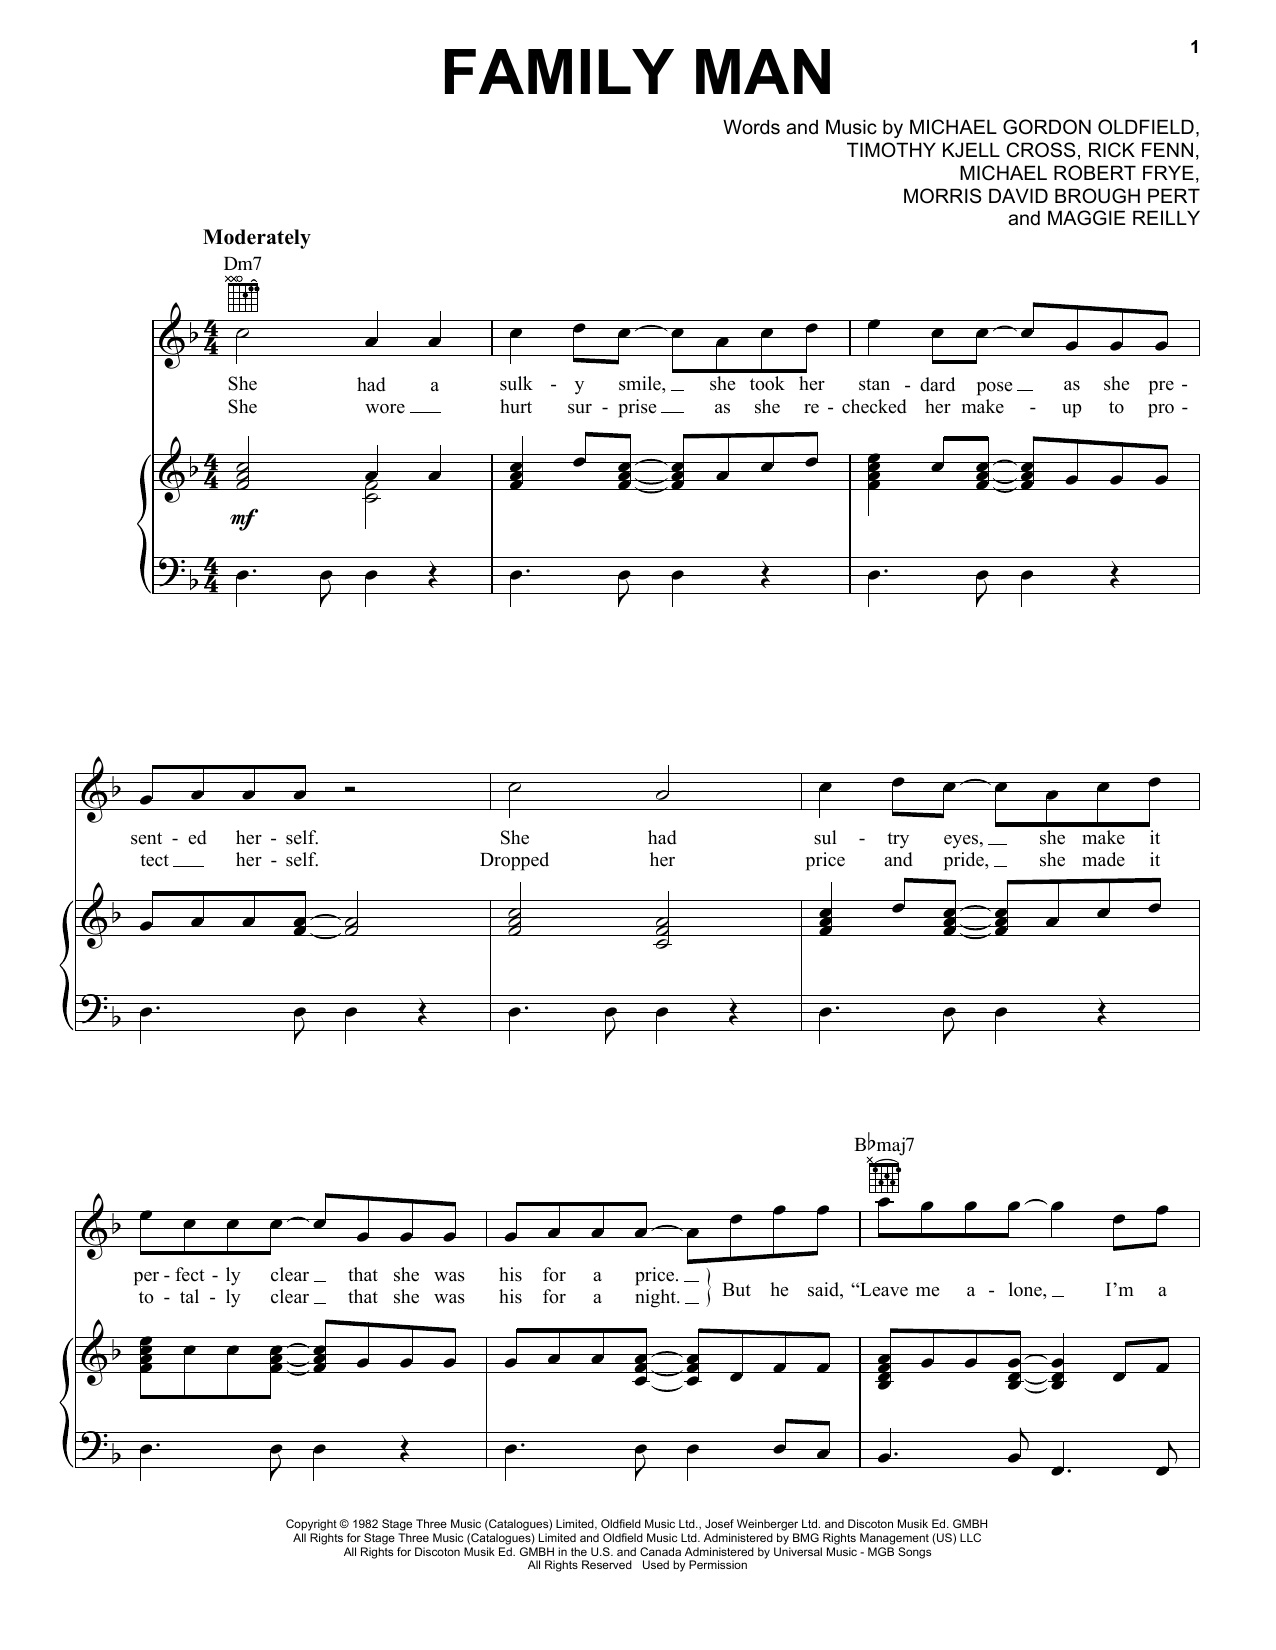 Download Hall & Oates Family Man Sheet Music